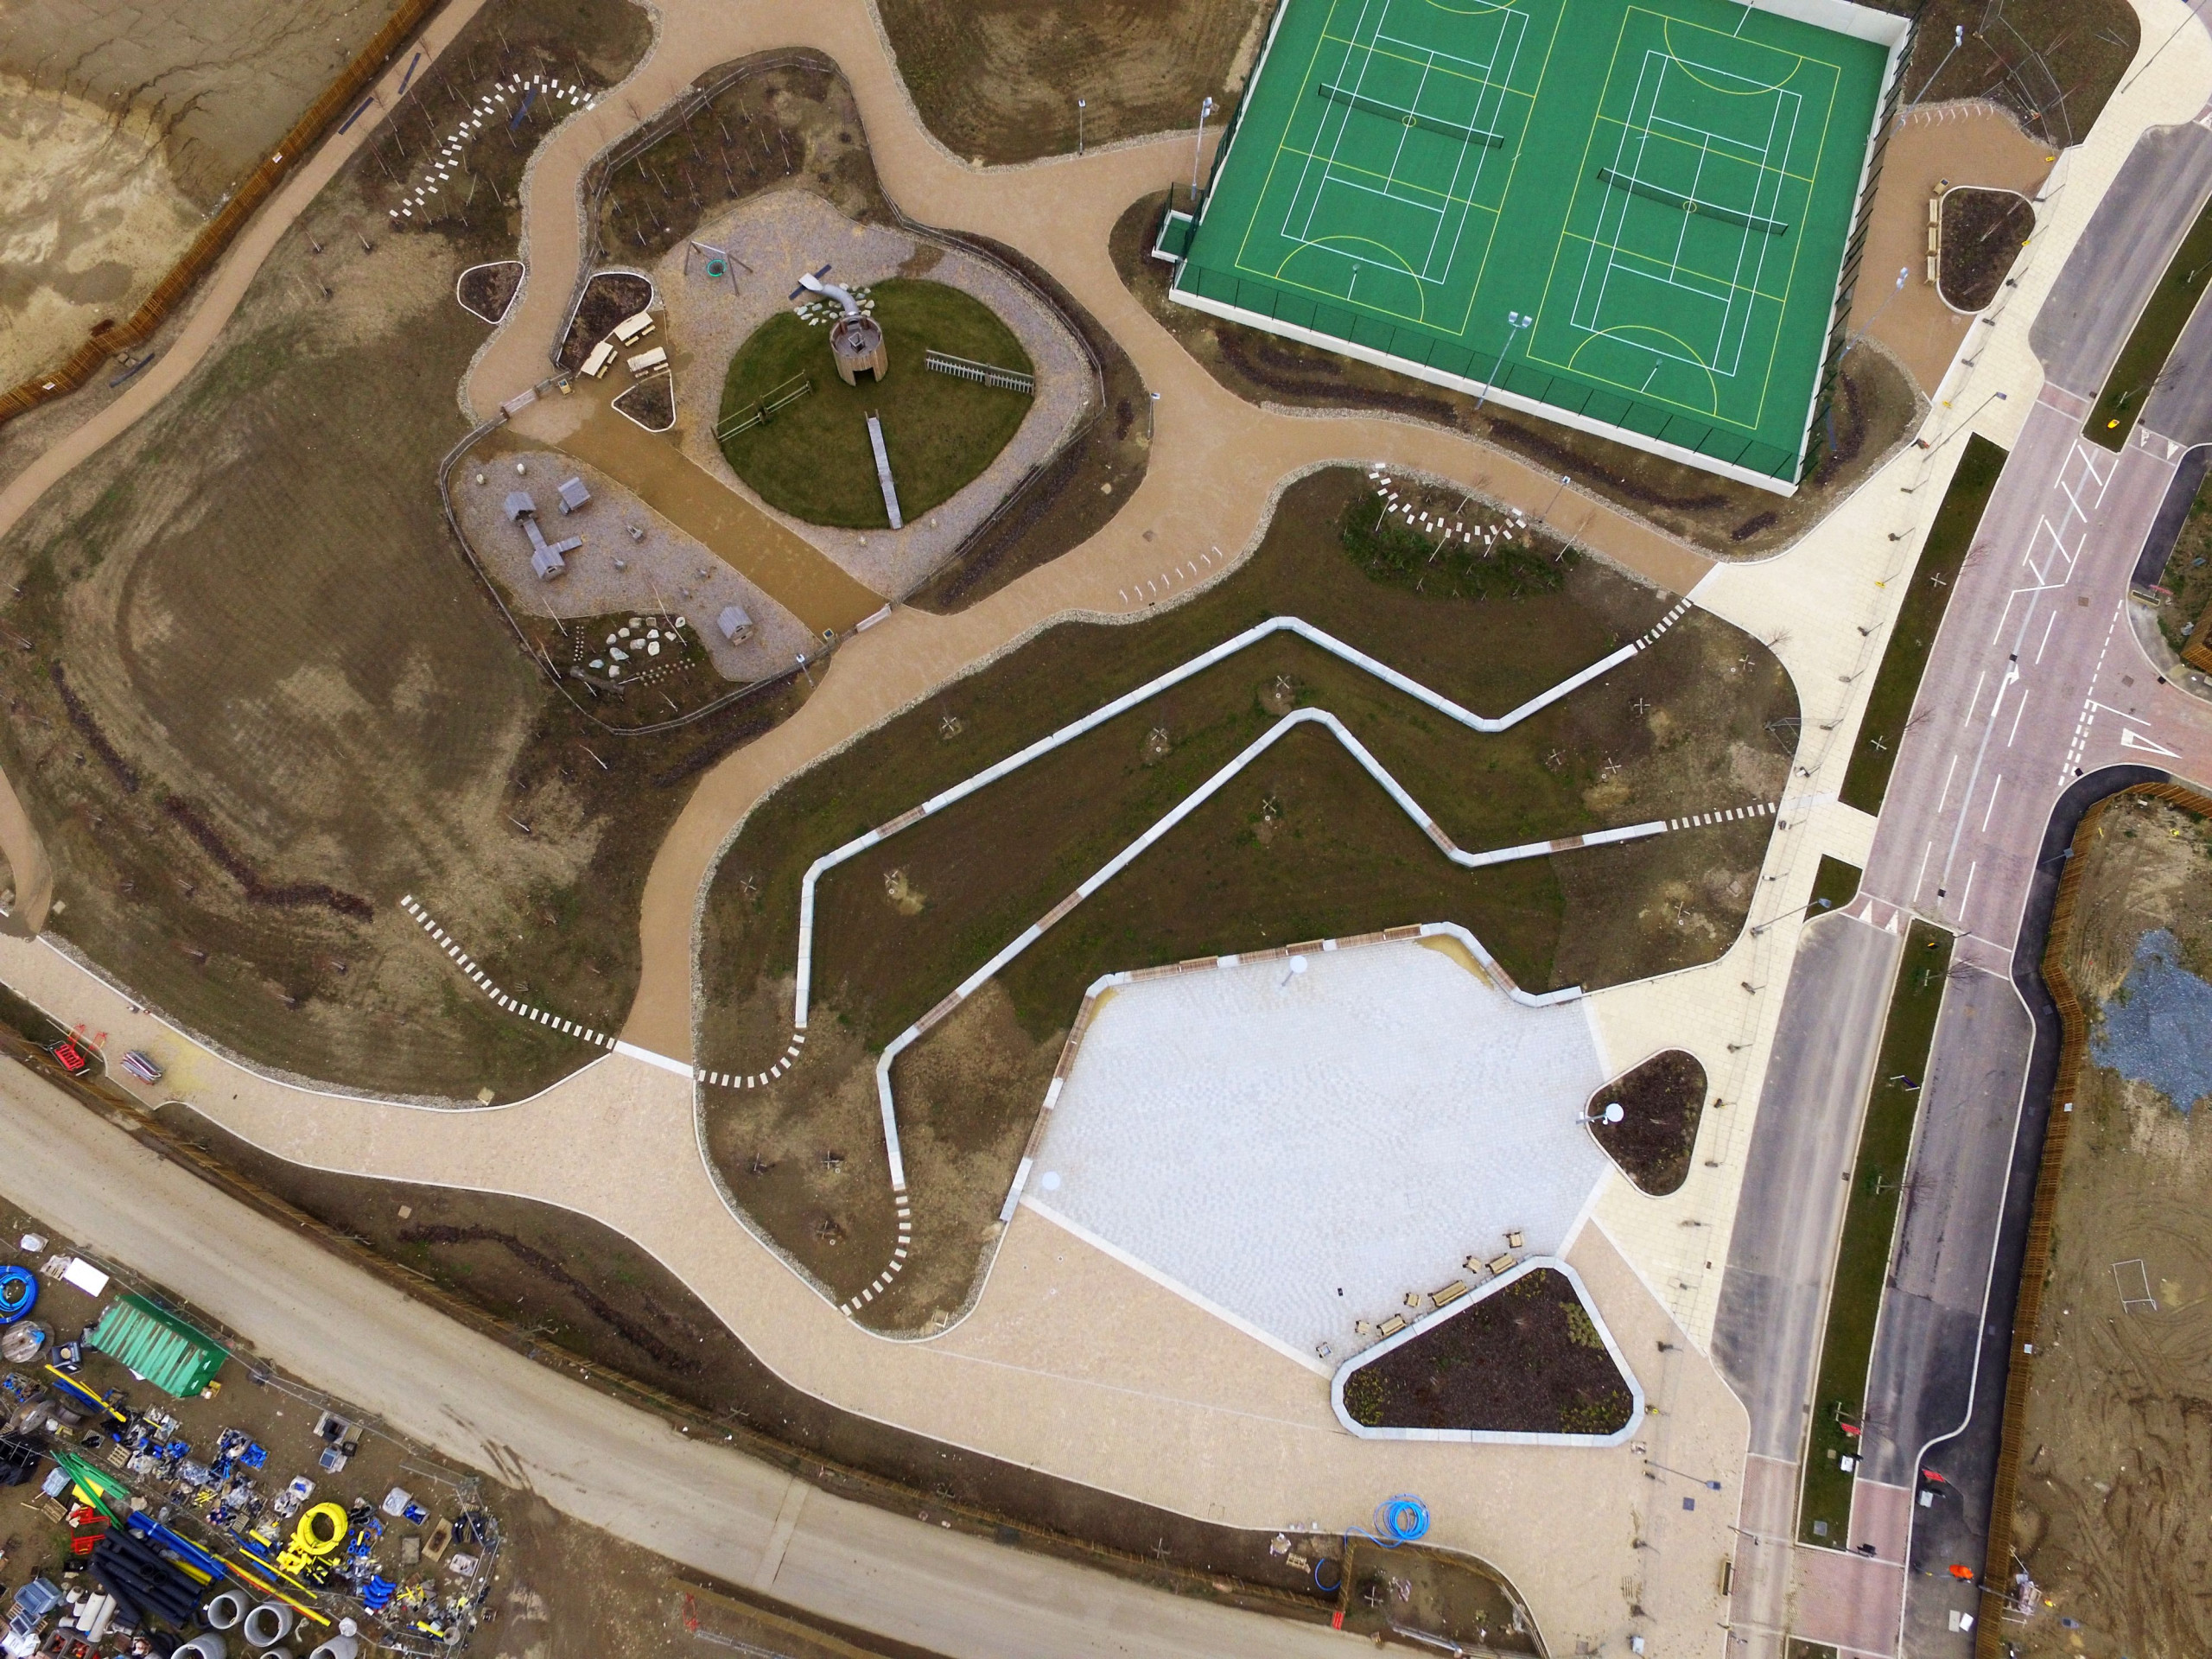 Aerial view of bespoke precast concrete seating units in housing development with tennis courts and play area